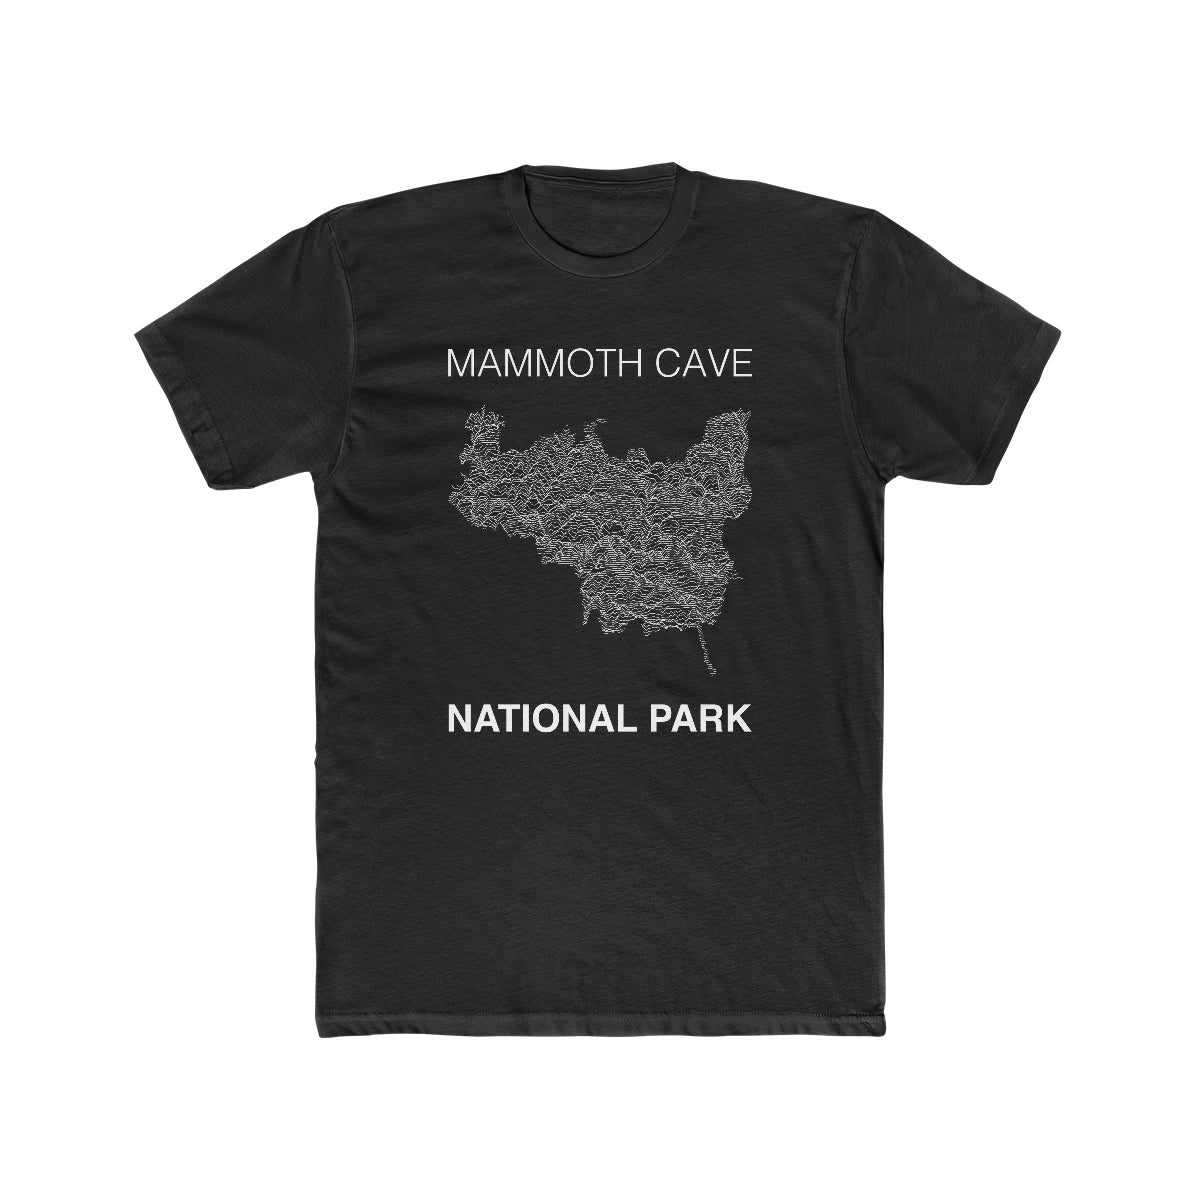 Mammoth Cave National Park T-Shirt Lines